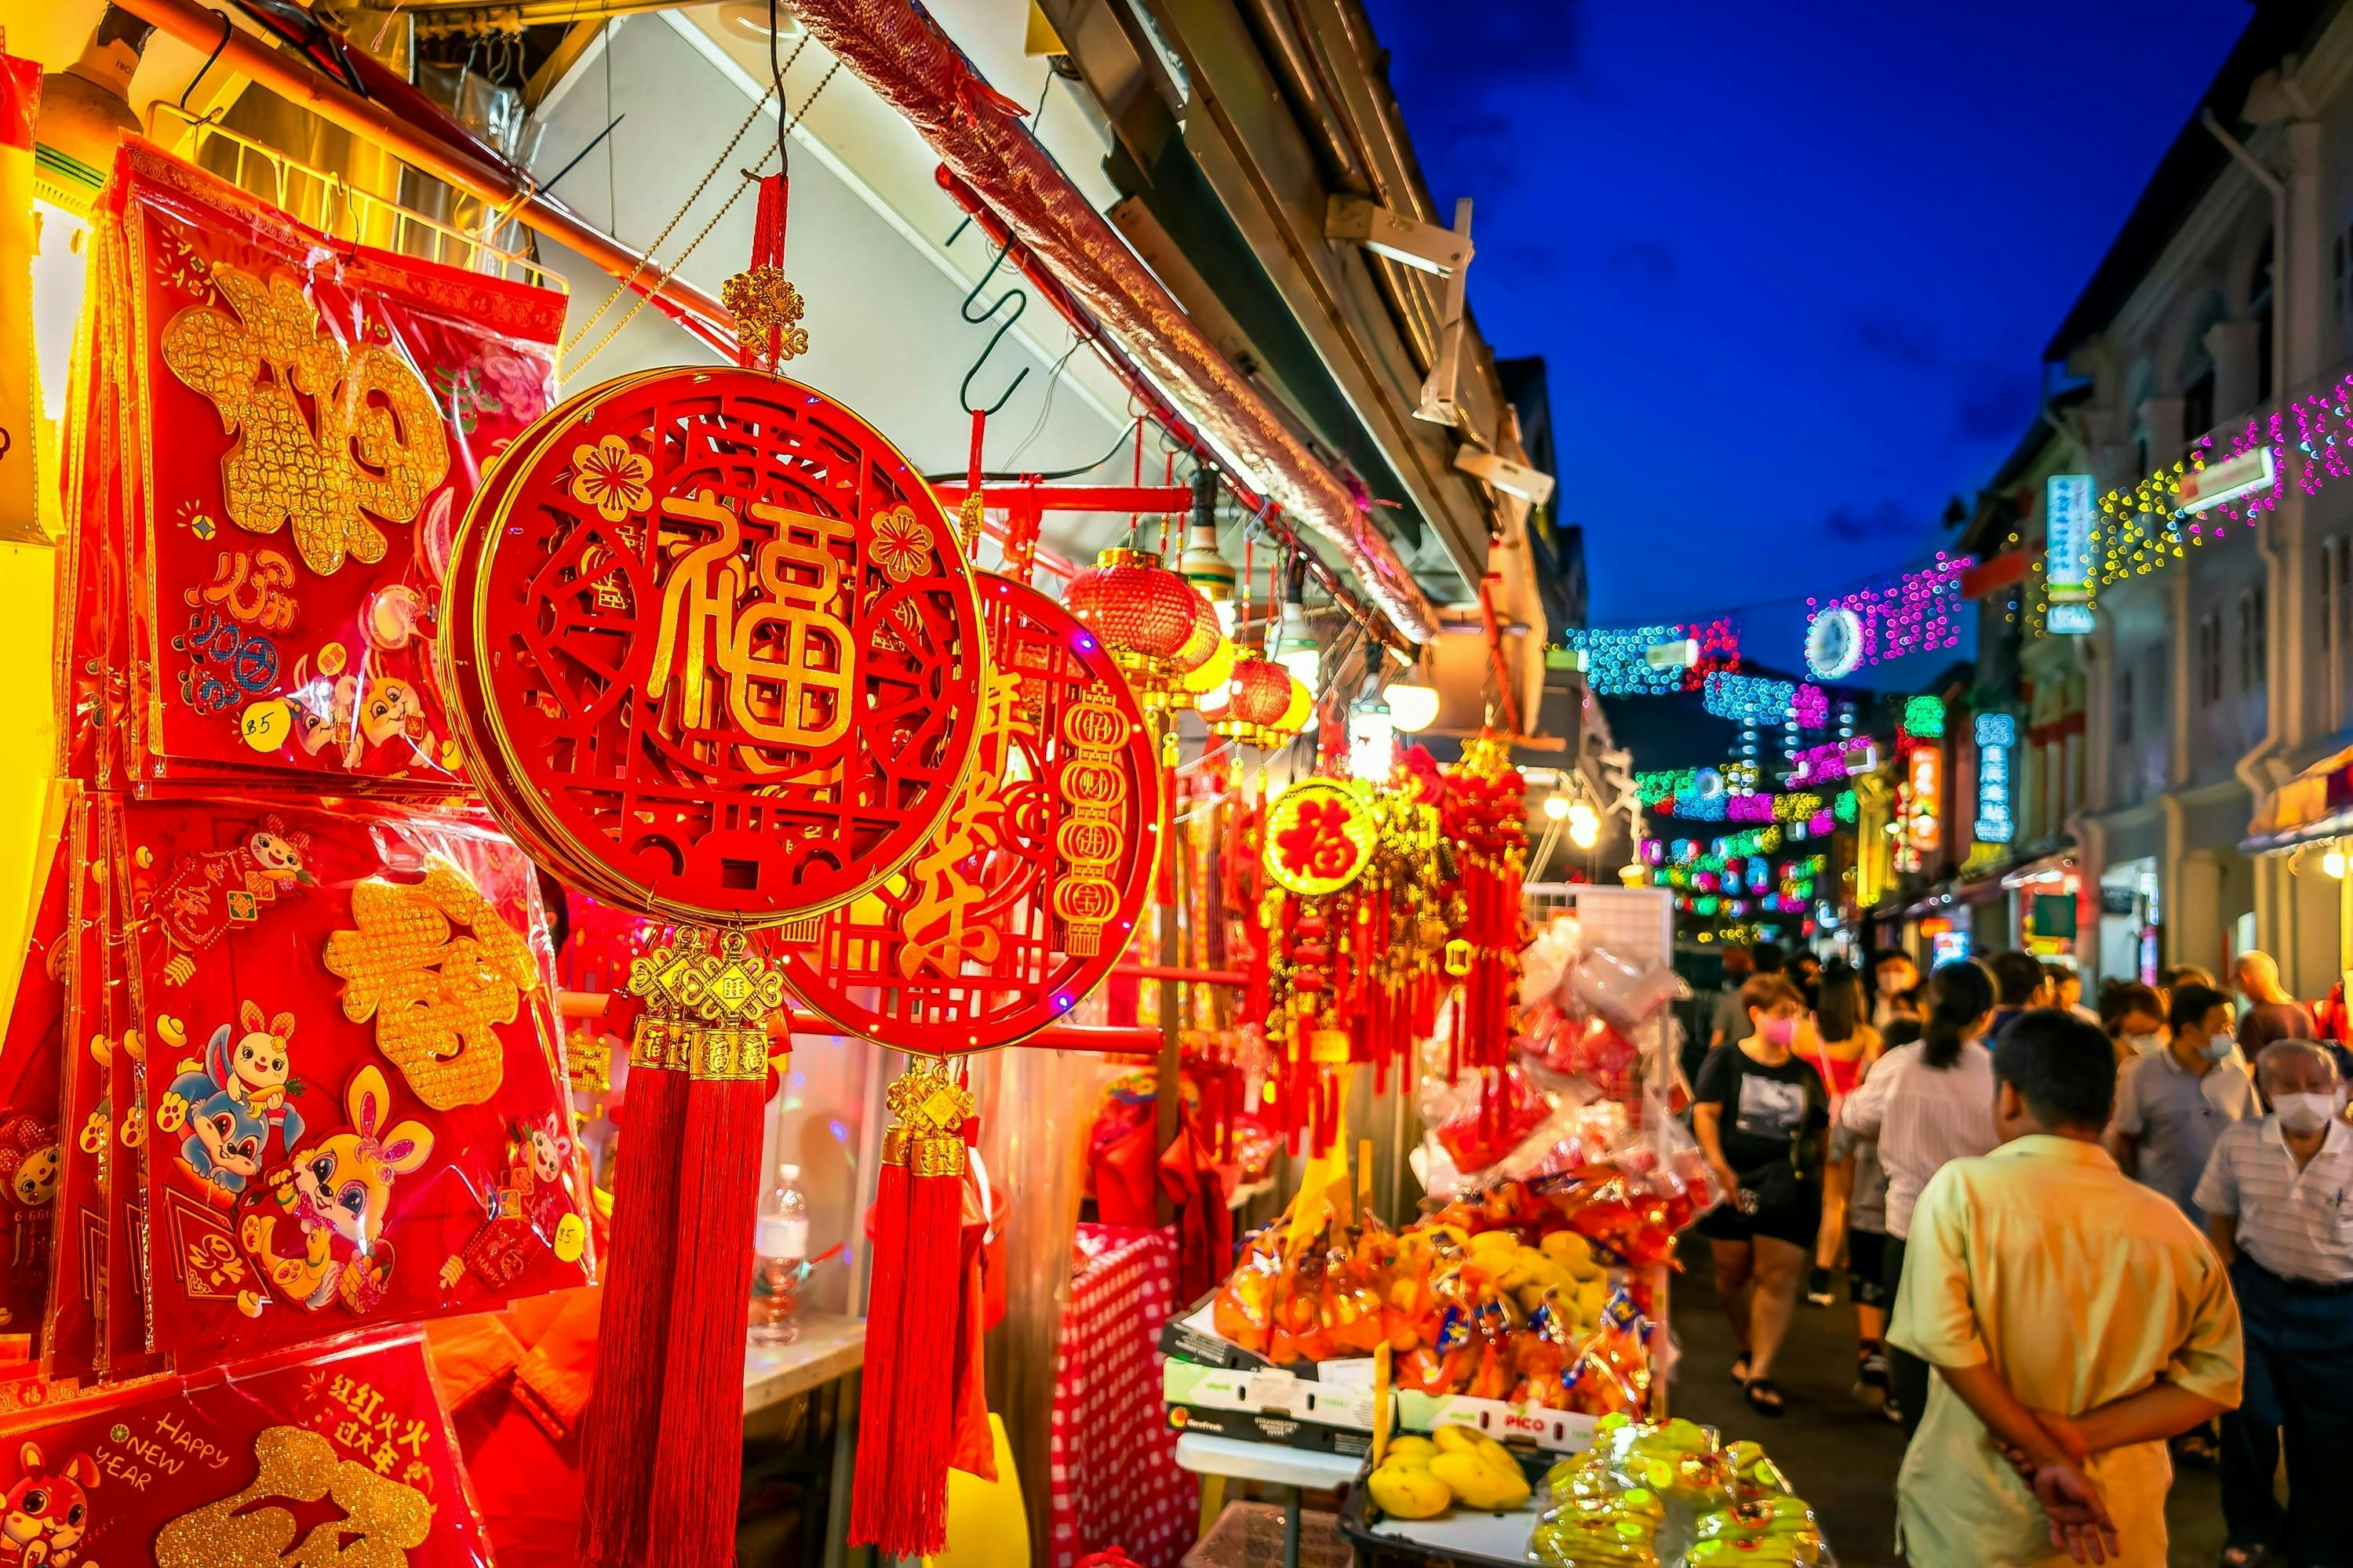 architecture, asian, attraction, building, business, china town, chinatown, chinatown street market, chinese, chinese new year, city, cityscape, clothes, colorful, crowd, cuisine, culture, day, decoration, destination, district, famous, food, heritage, holiday, landmark, lifestyle, local, lunar new year, market, night, outdoor, people, restaurant, shop, singapore, singapore market, south asia, souvenir, souvenir shop, stores, street, tour, tourism, tourist, town, traditional, travel, travel destination, urban urban adult male man person clothing footwear shoe festival